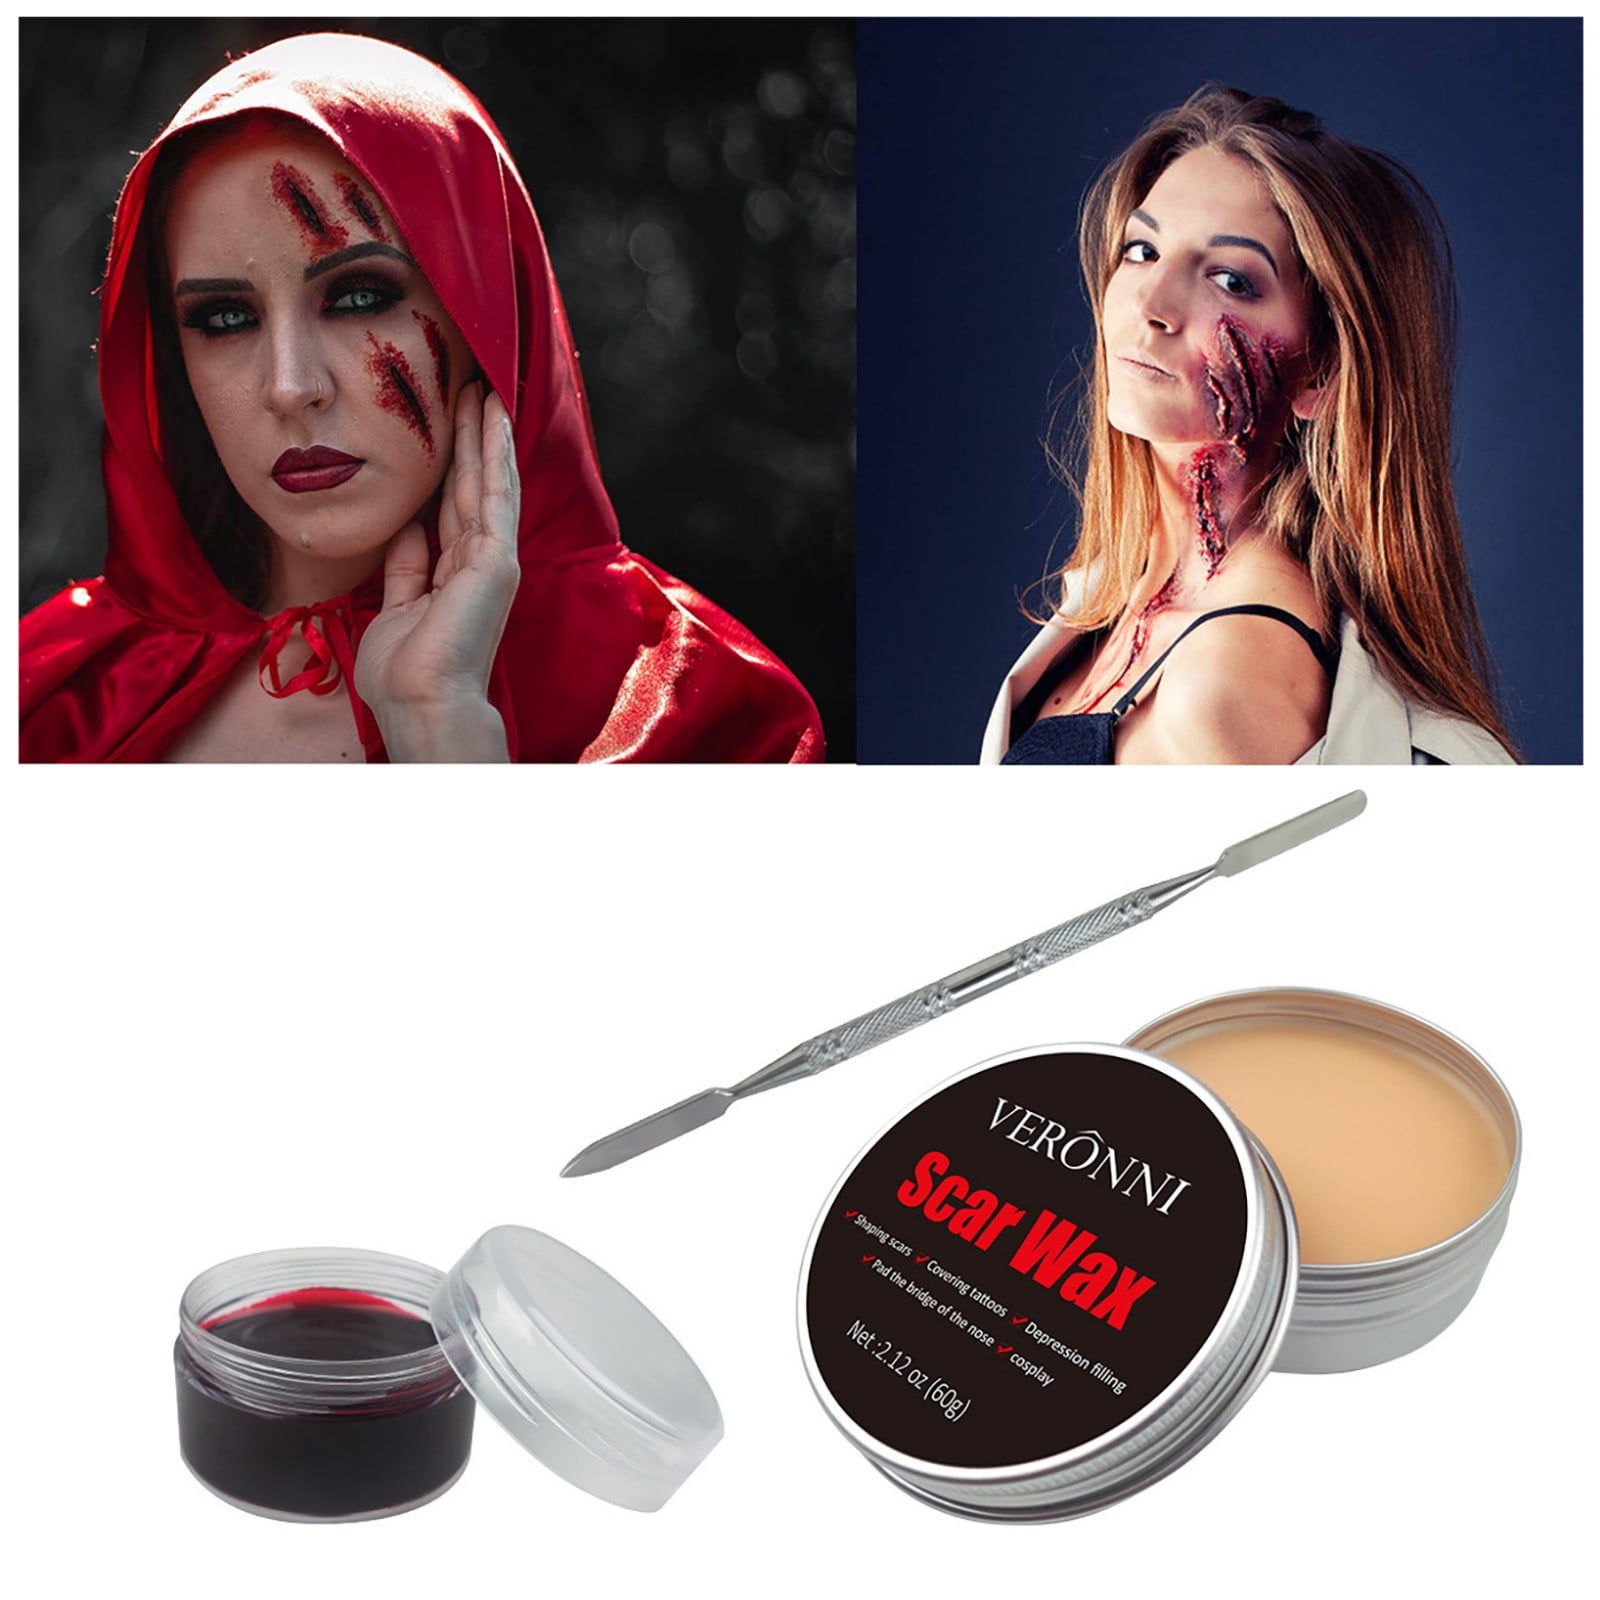 Narrative Cosmetics Scar Wax with Double-Ended Spatula, Moldable Wax for  Realistic Cuts and Injuries, Professional Makeup for the Stage, Film